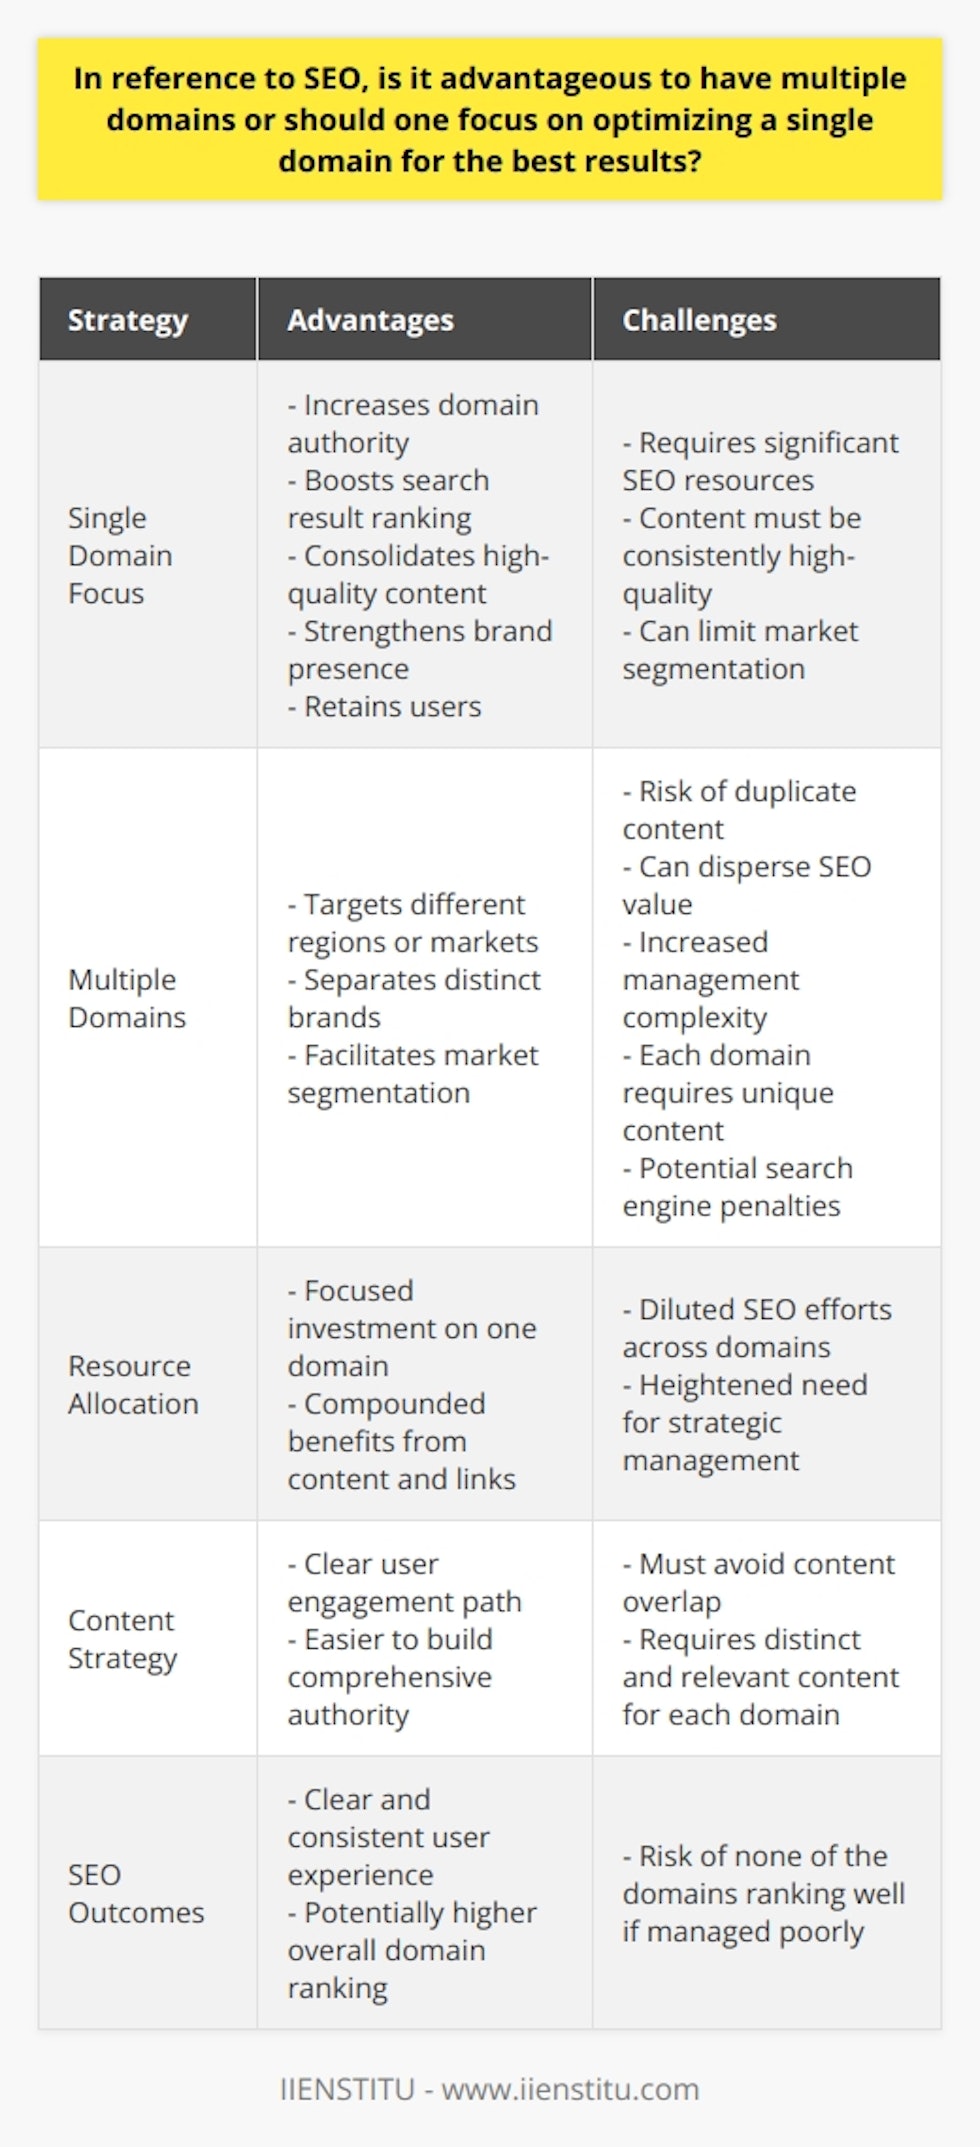 Optimal Utilization of Domains in SEOIn the realm of Search Engine Optimization (SEO), the debate between utilizing multiple domains versus concentrating on a single domain has long been a topic of discussion. Each approach has its considerations, and the strategic choice may rely on specific business objectives and resources. Understanding the implications of single versus multiple domain strategies in SEO is crucial for crafting an effective online presence.**Single Domain Focus**The advantages of concentrating SEO efforts on a single domain are manifold. The consistent effort on one domain increases the site's reputation, thereby potentially boosting its domain authority. High domain authority is a critical factor that search engines, such as Google, consider when determining search result rankings. The consolidation of high-quality content under one domain not only serves to retain users on your site but also establishes a stronger brand presence and credibility.*Resource Allocation and Quality Content*Focusing SEO resources on a single domain means that investments in content creation and link-building are compounded, which can lead to more substantial outcomes. This is especially true for businesses that have limited SEO resources or for smaller entities aiming to establish a foothold in a competitive online space.**Challenges with Multiple Domains**While there may be valid reasons for businesses to operate multiple domains — such as targeting different geographic regions, markets, or having distinct brands within a corporate portfolio — there are inherent challenges from an SEO perspective.*Duplicate Content Risks*One significant risk associated with multiple domains is the potential for duplicate content. Not only does this disperse the SEO value among the several domains, but it can also incur penalties from search engines. Duplicate content can lead to confusion for search algorithms trying to index and rank pages, which might result in none of the domains achieving the desired visibility. *Unique Content: A Must-Have*If operating multiple domains is a strategic necessity, it’s important to ensure that each domain has unique, relevant, and valuable content. This minimizes the risk of being penalized for content duplication and allows each domain to build its own authority and serve its respective purpose effectively.**Conclusion**For many businesses, the path to optimal SEO results lies in perfecting their presence on a single domain. This approach allows for a consolidated use of resources, the buildup of comprehensive domain authority, and provides clarity for users and search engines alike. However, should the strategy necessitate multiple domains, careful planning and a commitment to creating high-quality, unique content for each domain are imperative to achieve success. In every case, avoiding duplication and delivering value to users are the pillars of a sound SEO strategy.